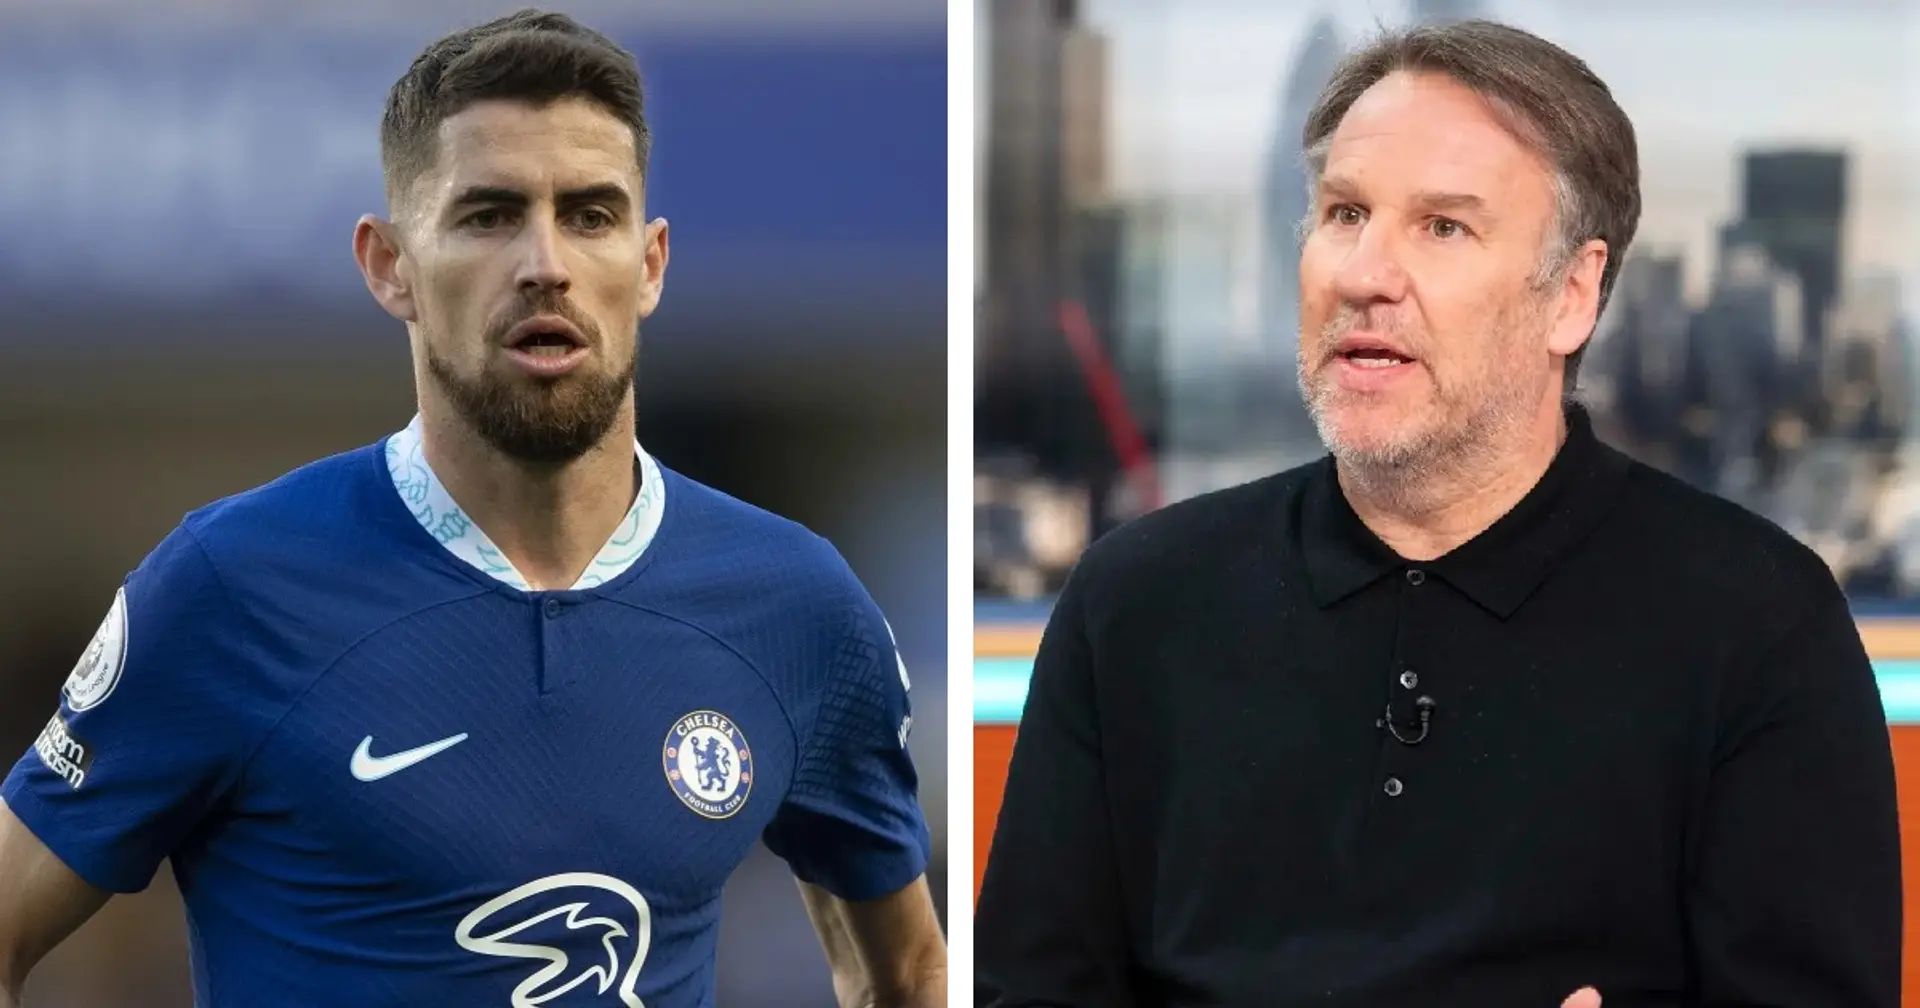 Merson says one Chelsea player will have to play like Jorginho for them to win Carabao Cup